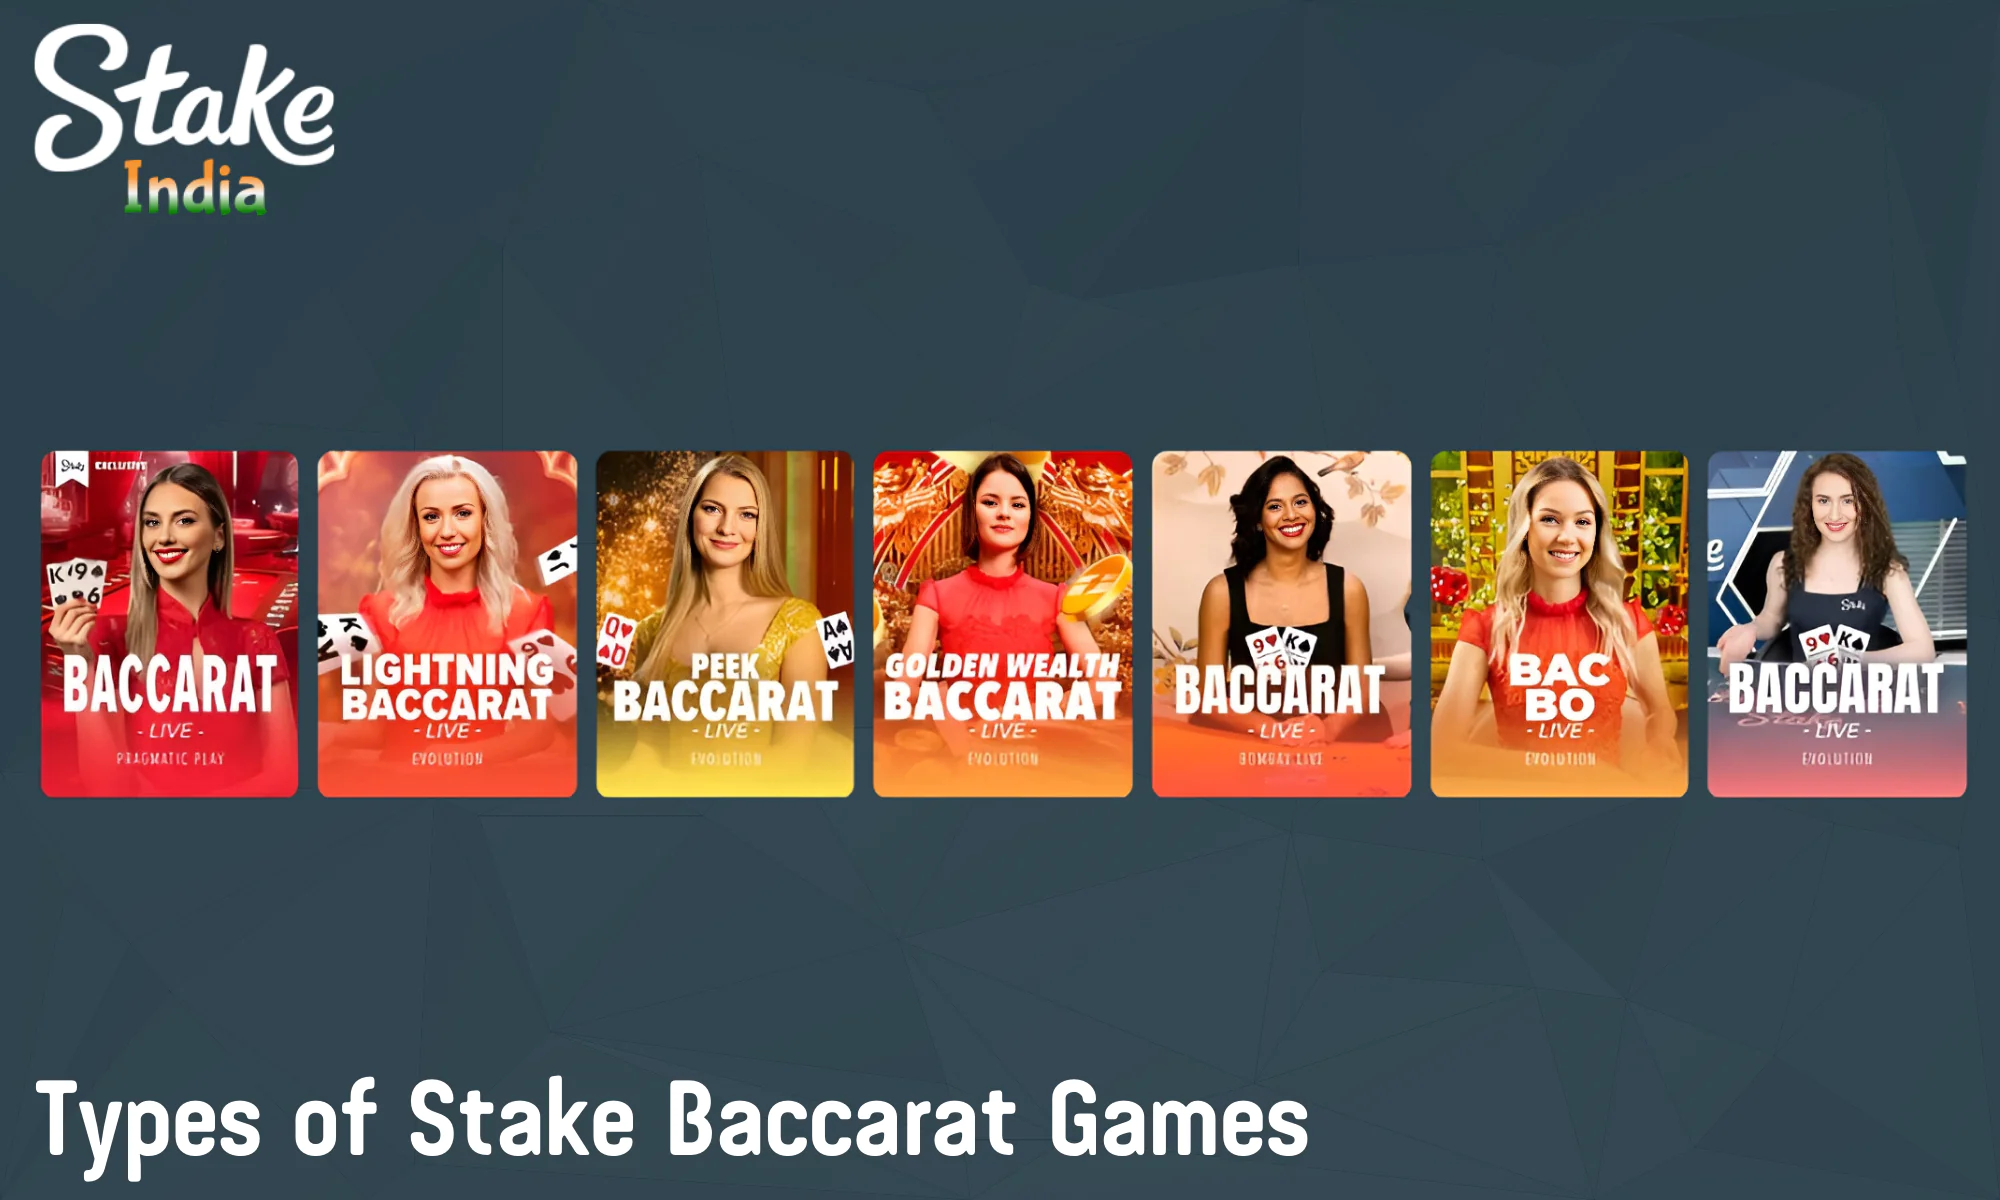 Currently, Stake offers only 7 types of live baccarat games